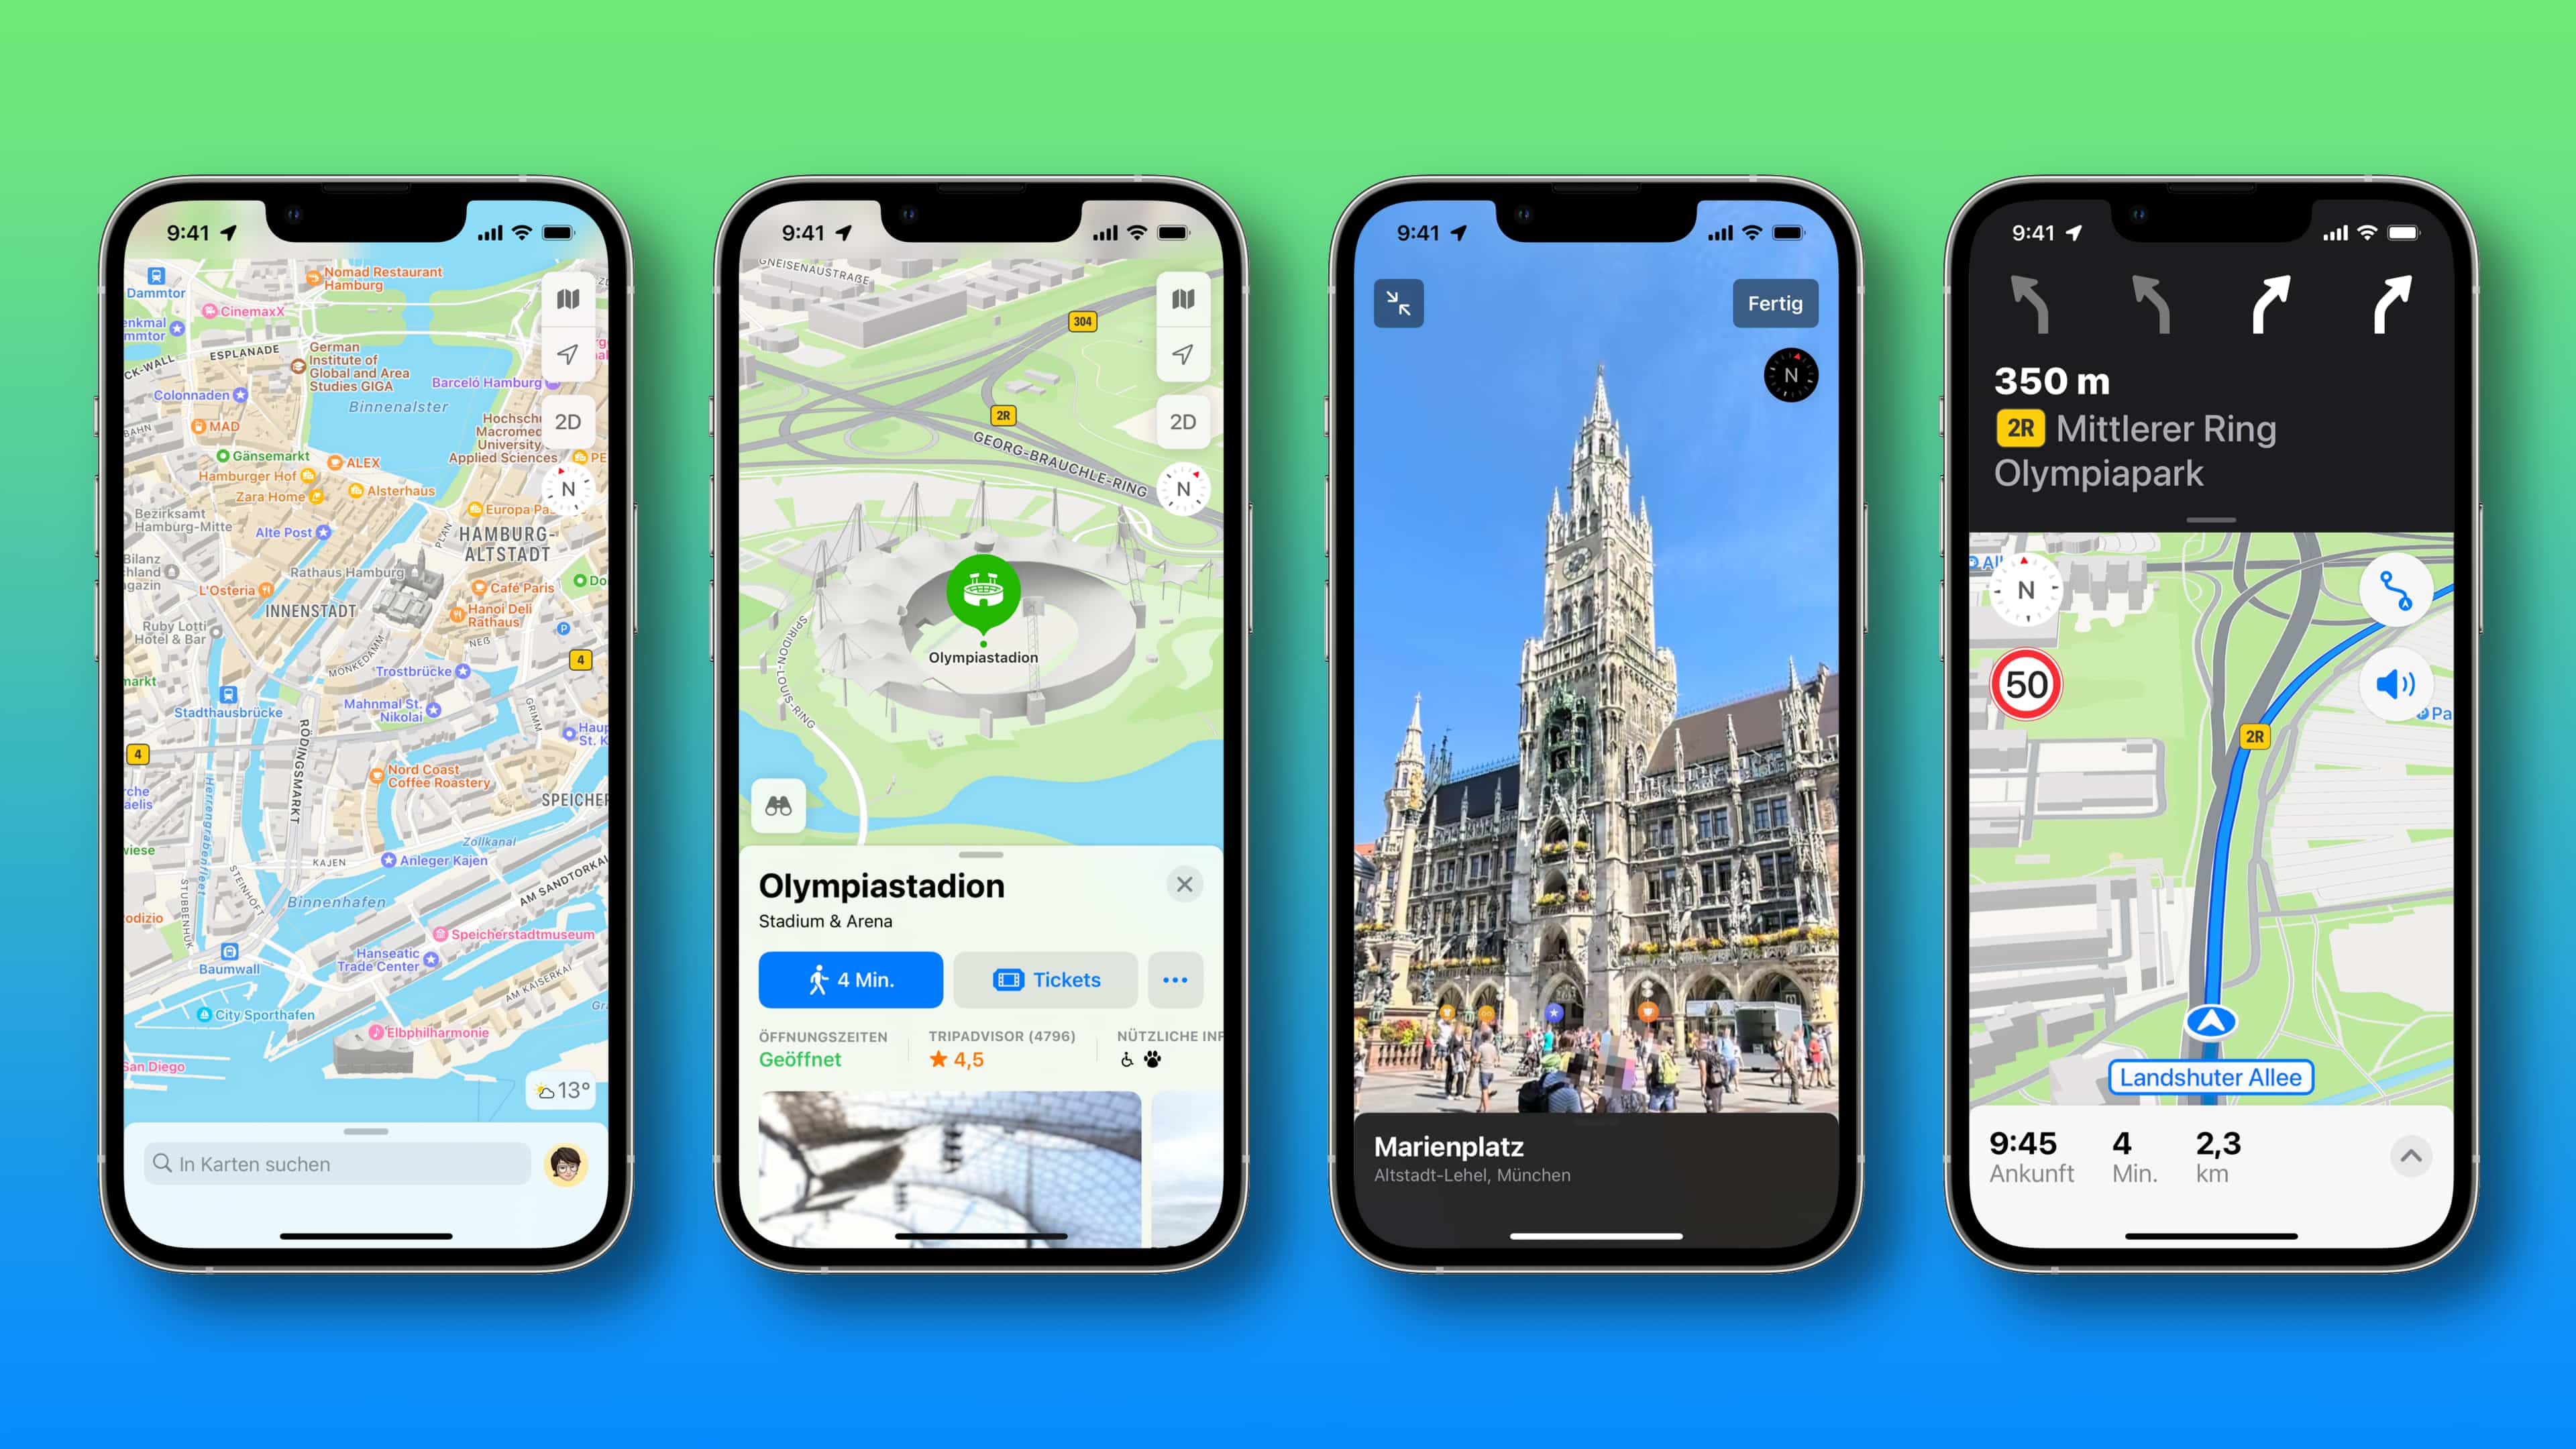 Four iPhone screenshots showcasing the new Apple Maps features in Germany, from left to right: detailed road coverage, 3D landmarks like Olympiastadion, the Look Around feature for Marienplatz and improved navigation.